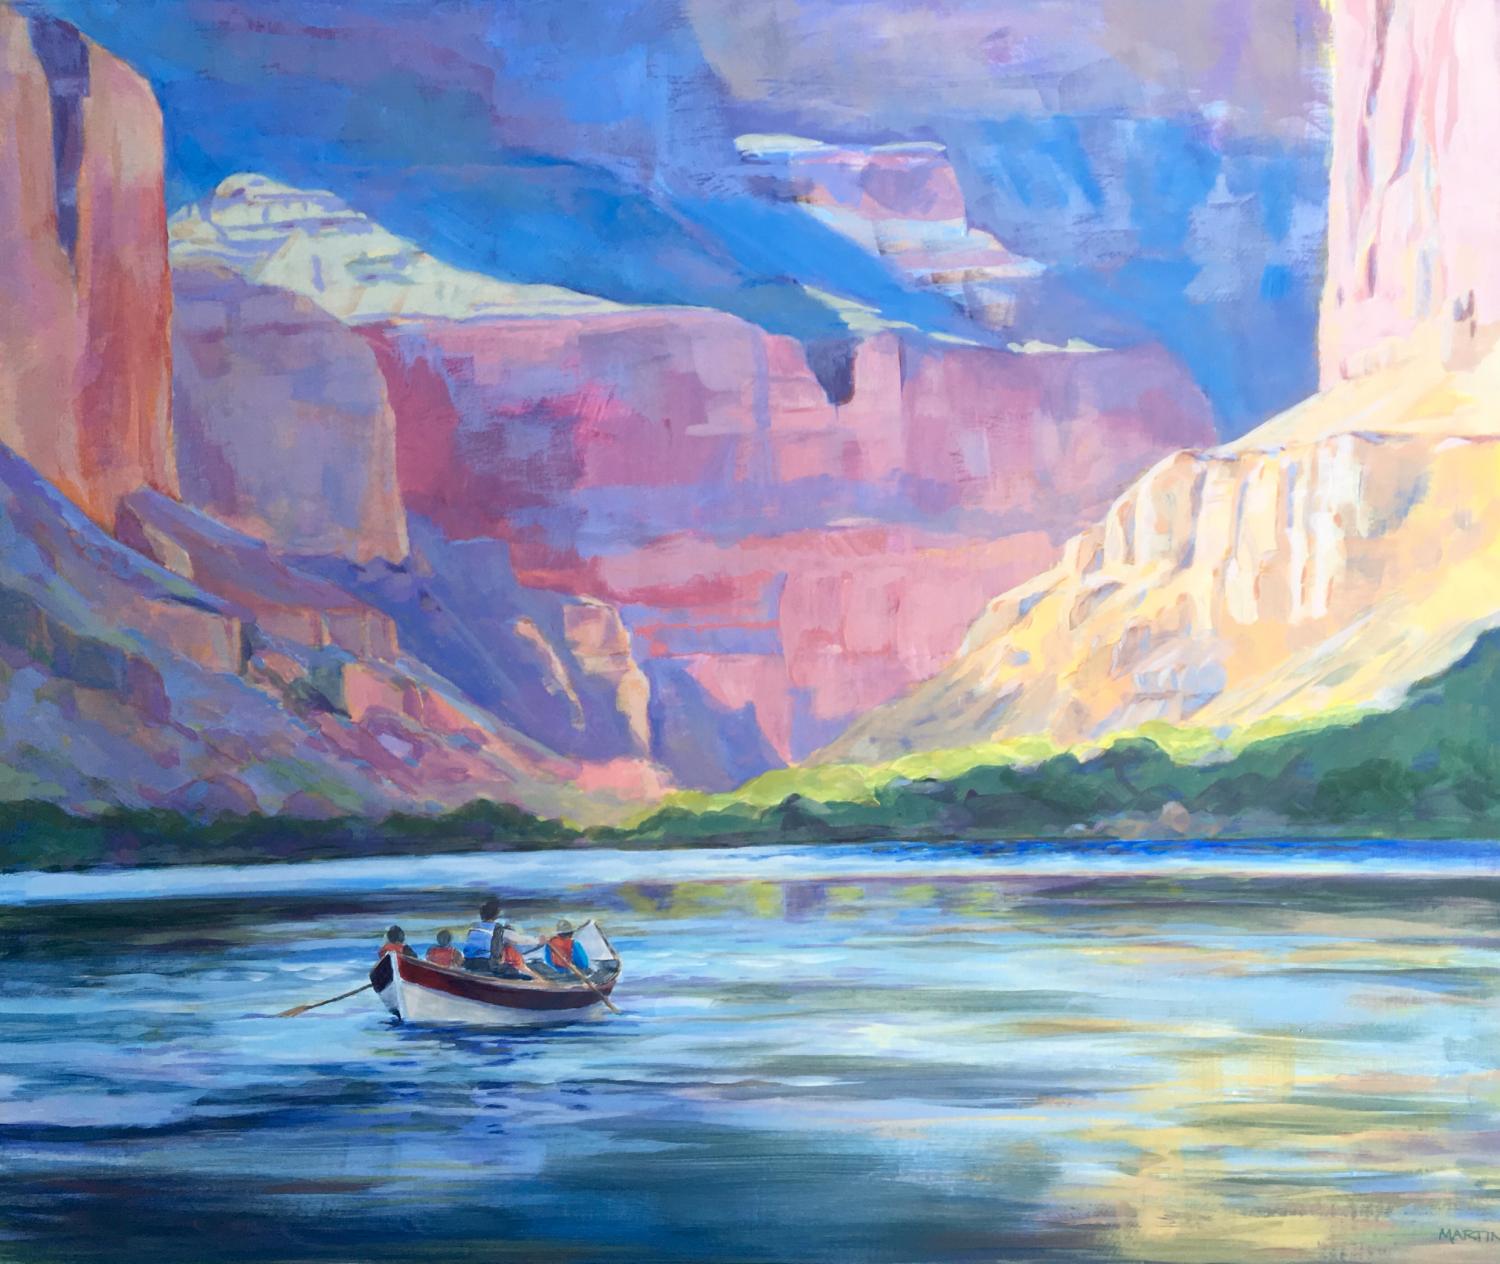 Marble Canyon, Grand Canyon National Park. Original oil painting by Cyd Martin